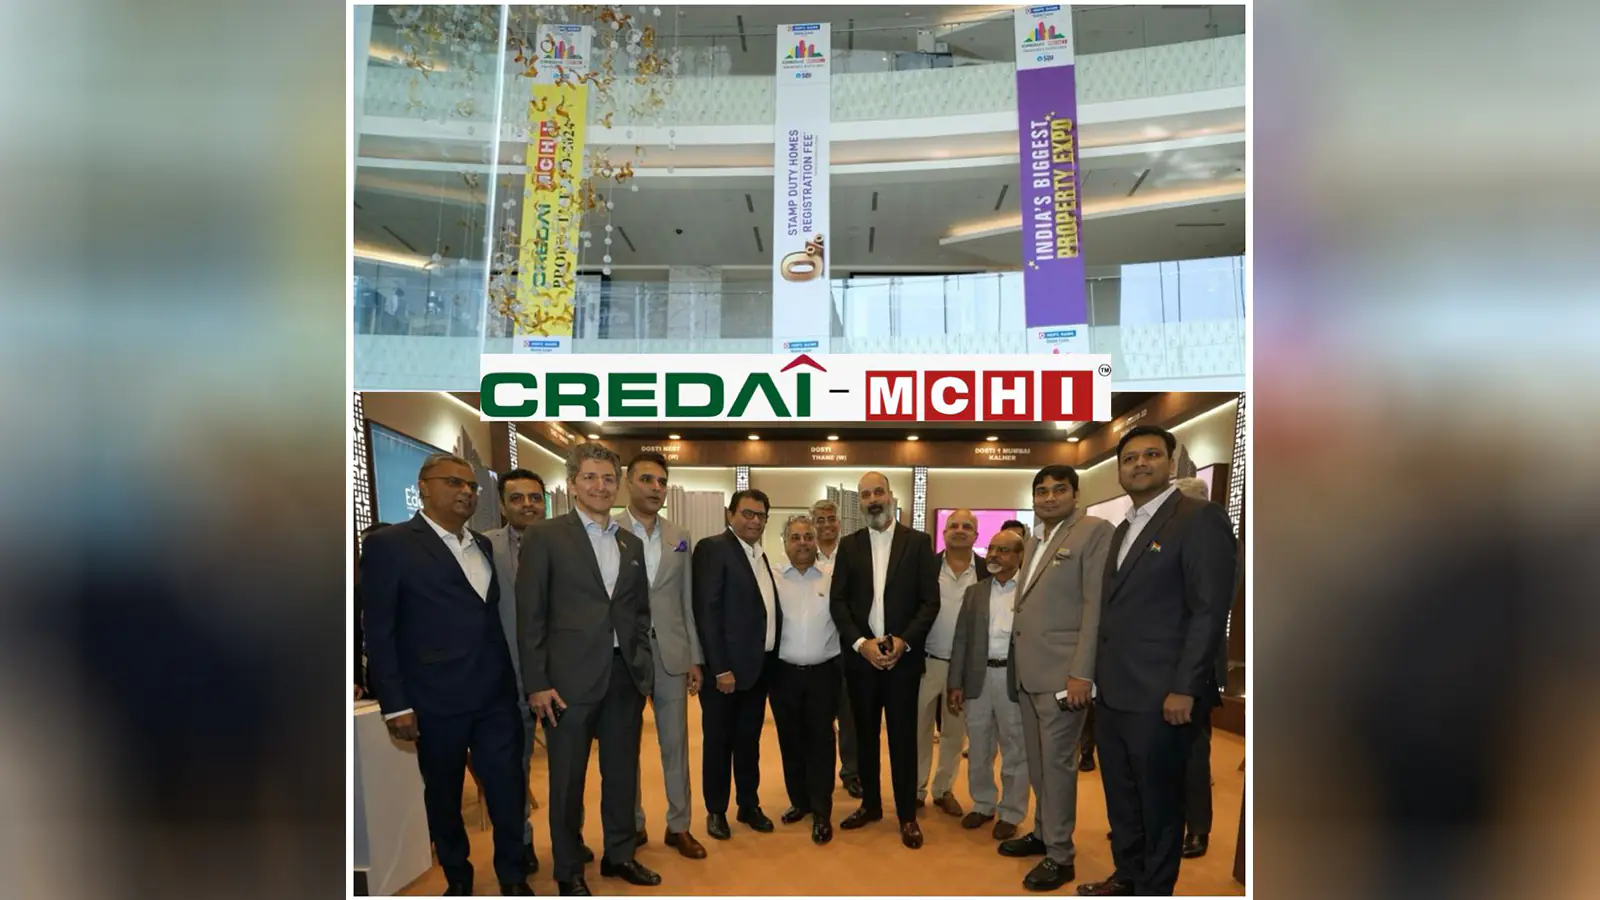 31st CREDAI-MCHI Property Expo triumphs with total footfall of  24,716 serious home buyers and over 185 properties booked  ranging from Rs. 60 lakhs to Rs. 10 crore